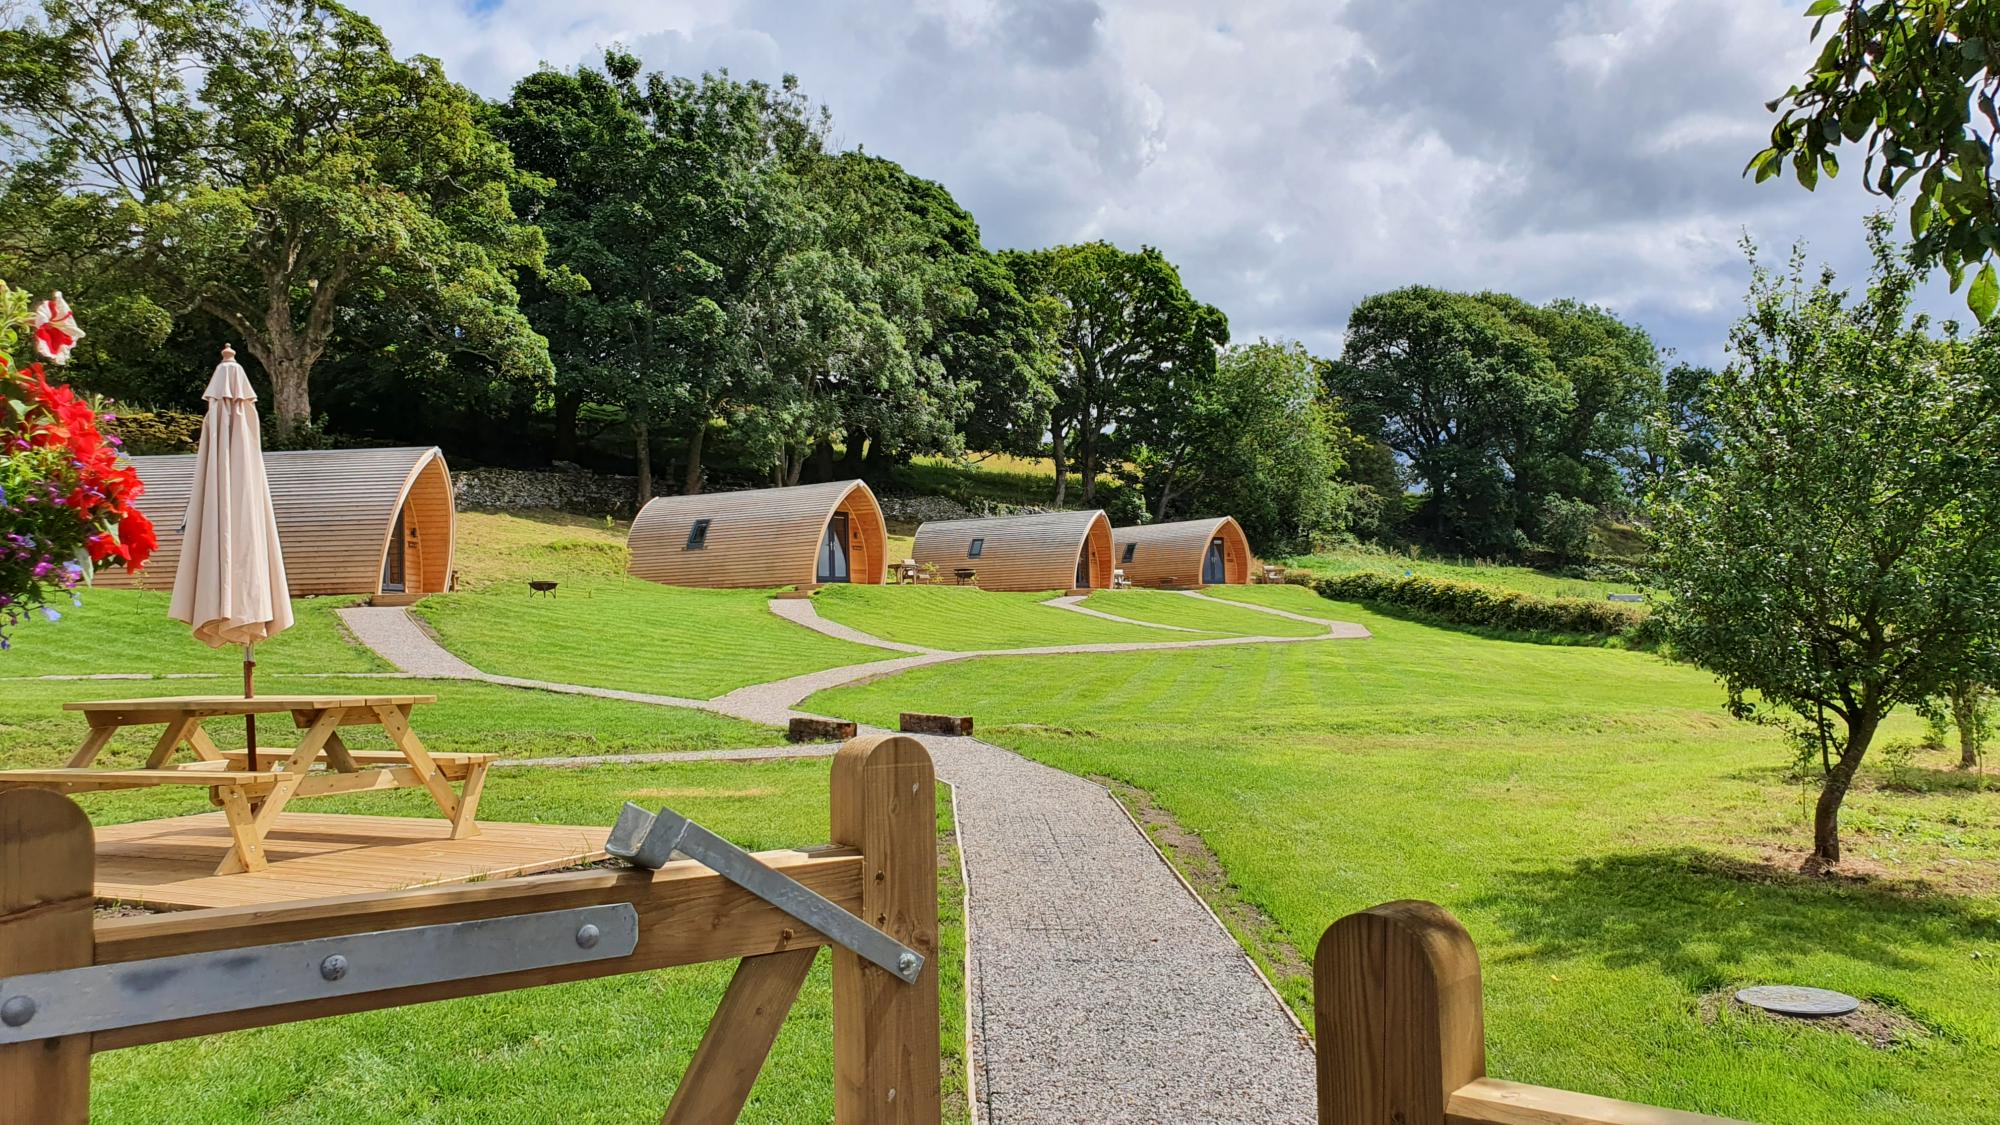 Glamping in North West England holidays at Cool Places